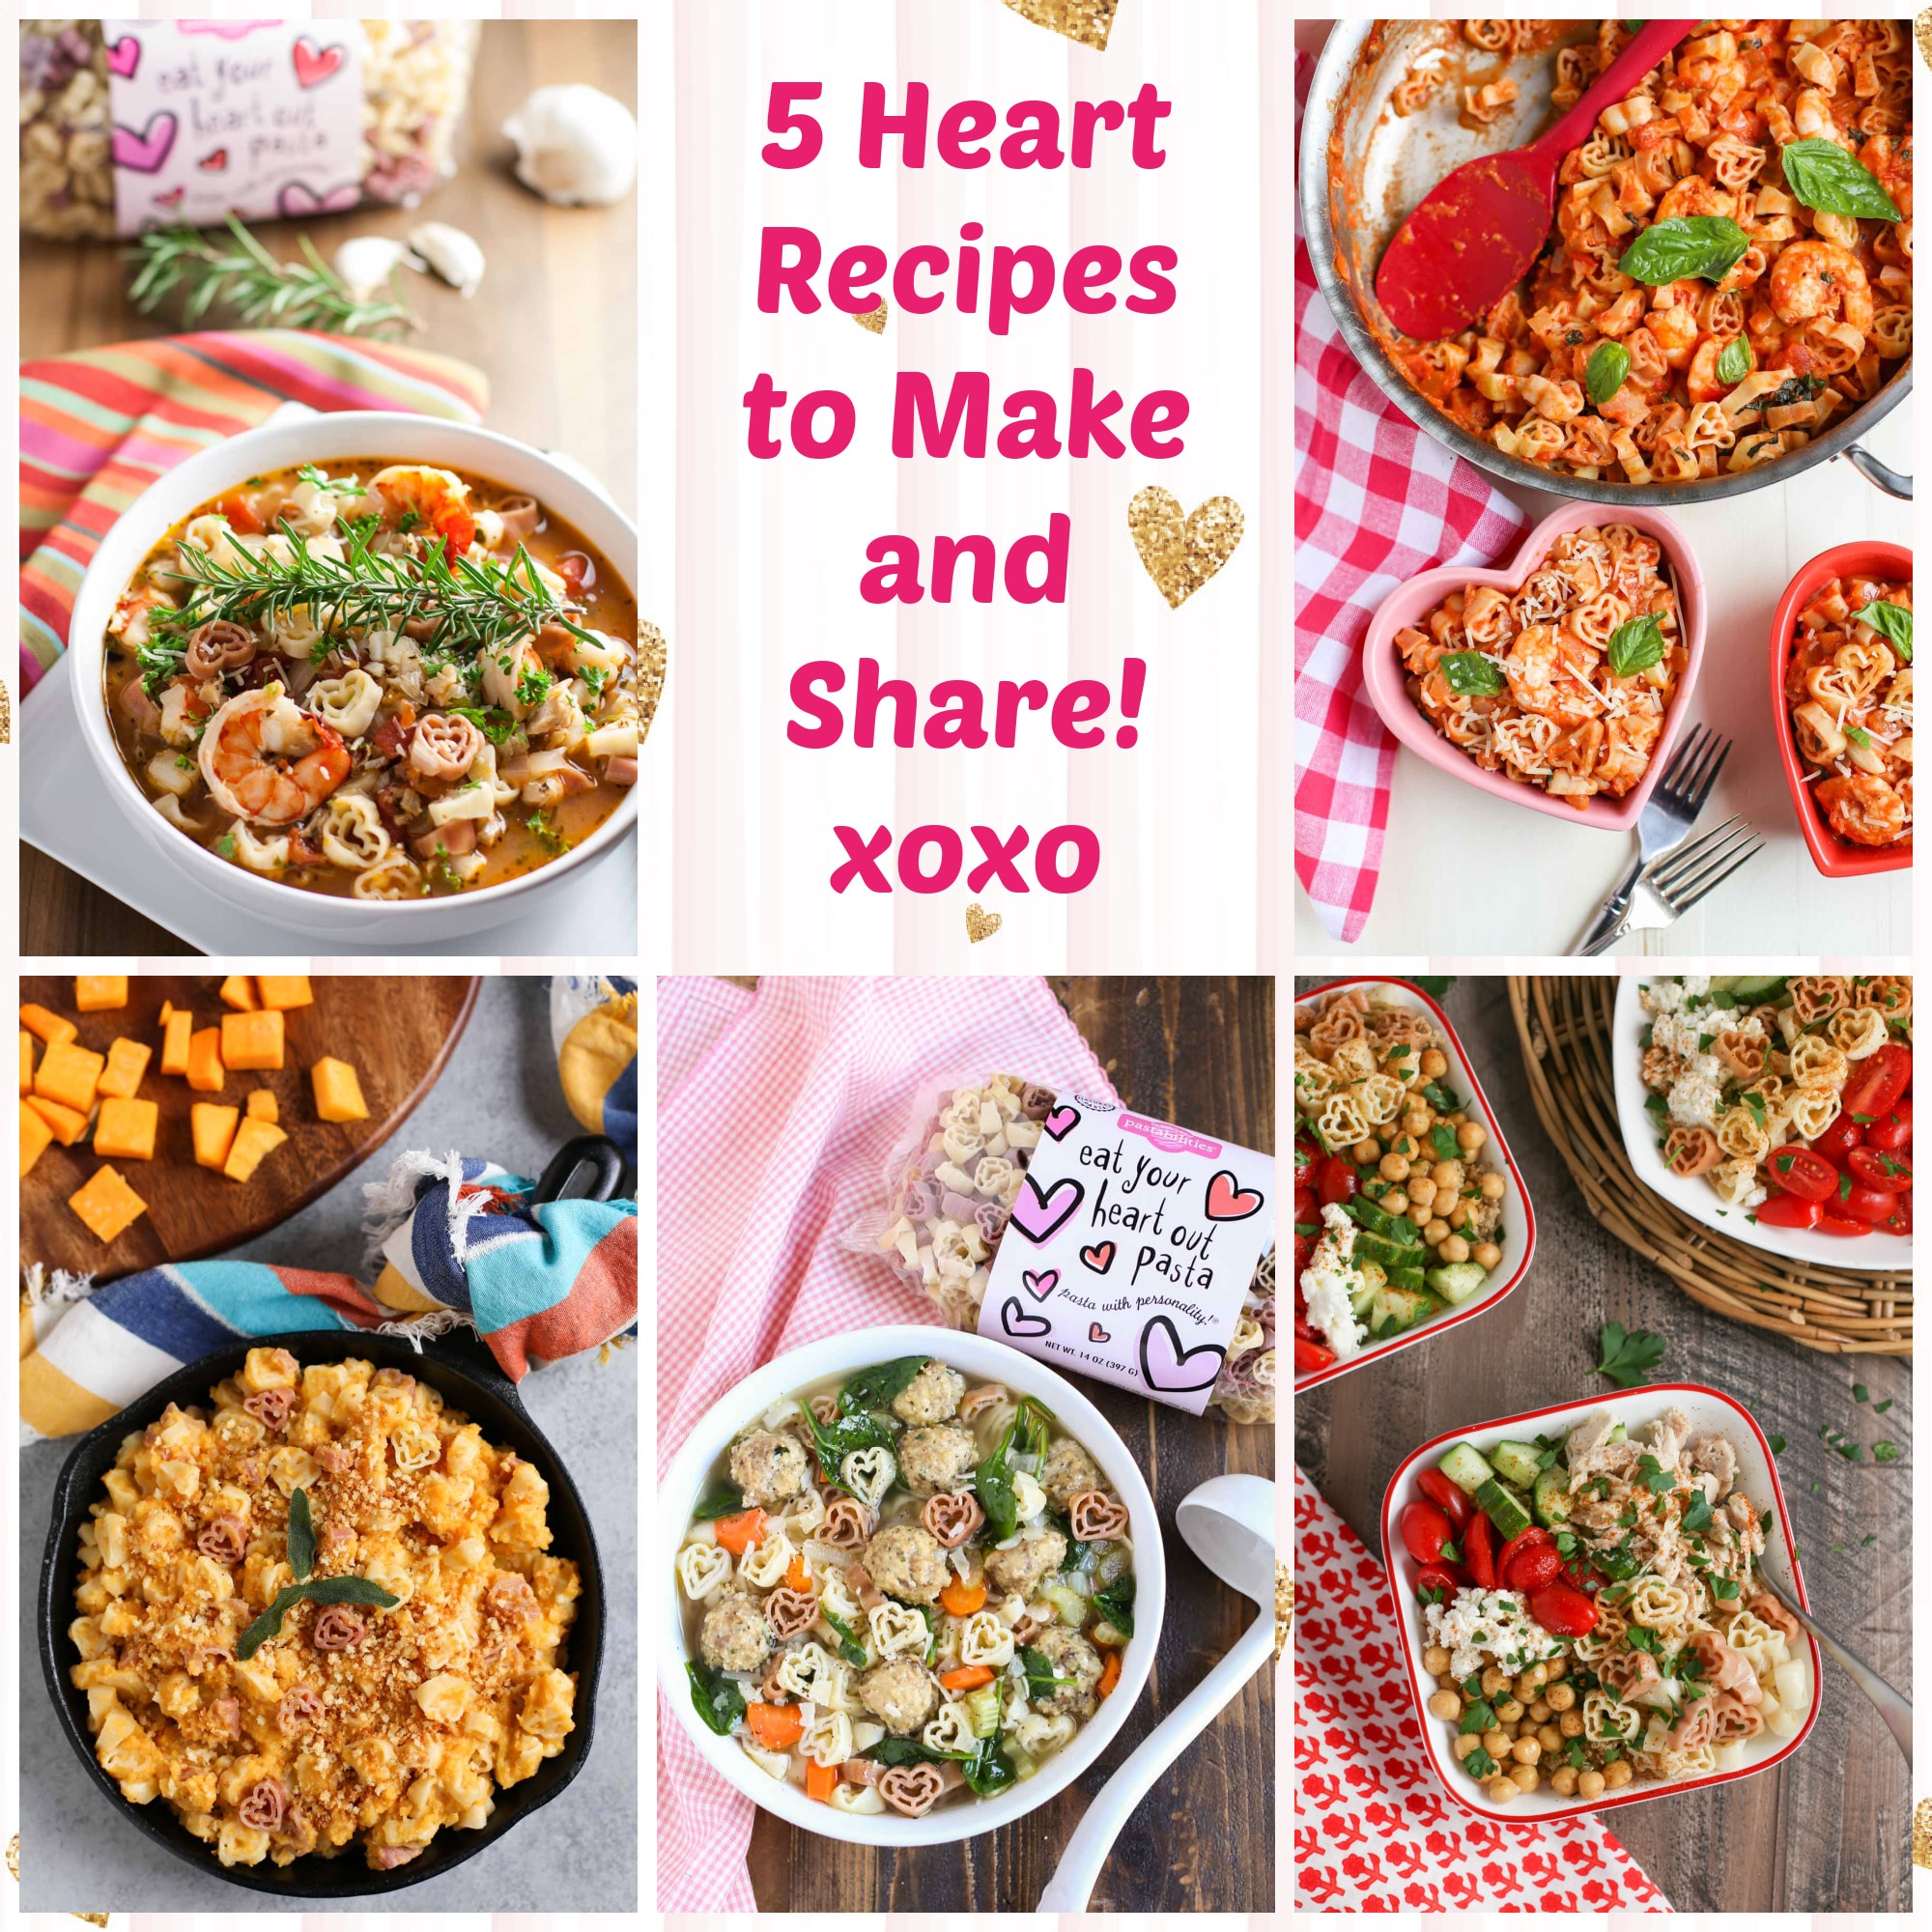 5 heart recipes to make and share